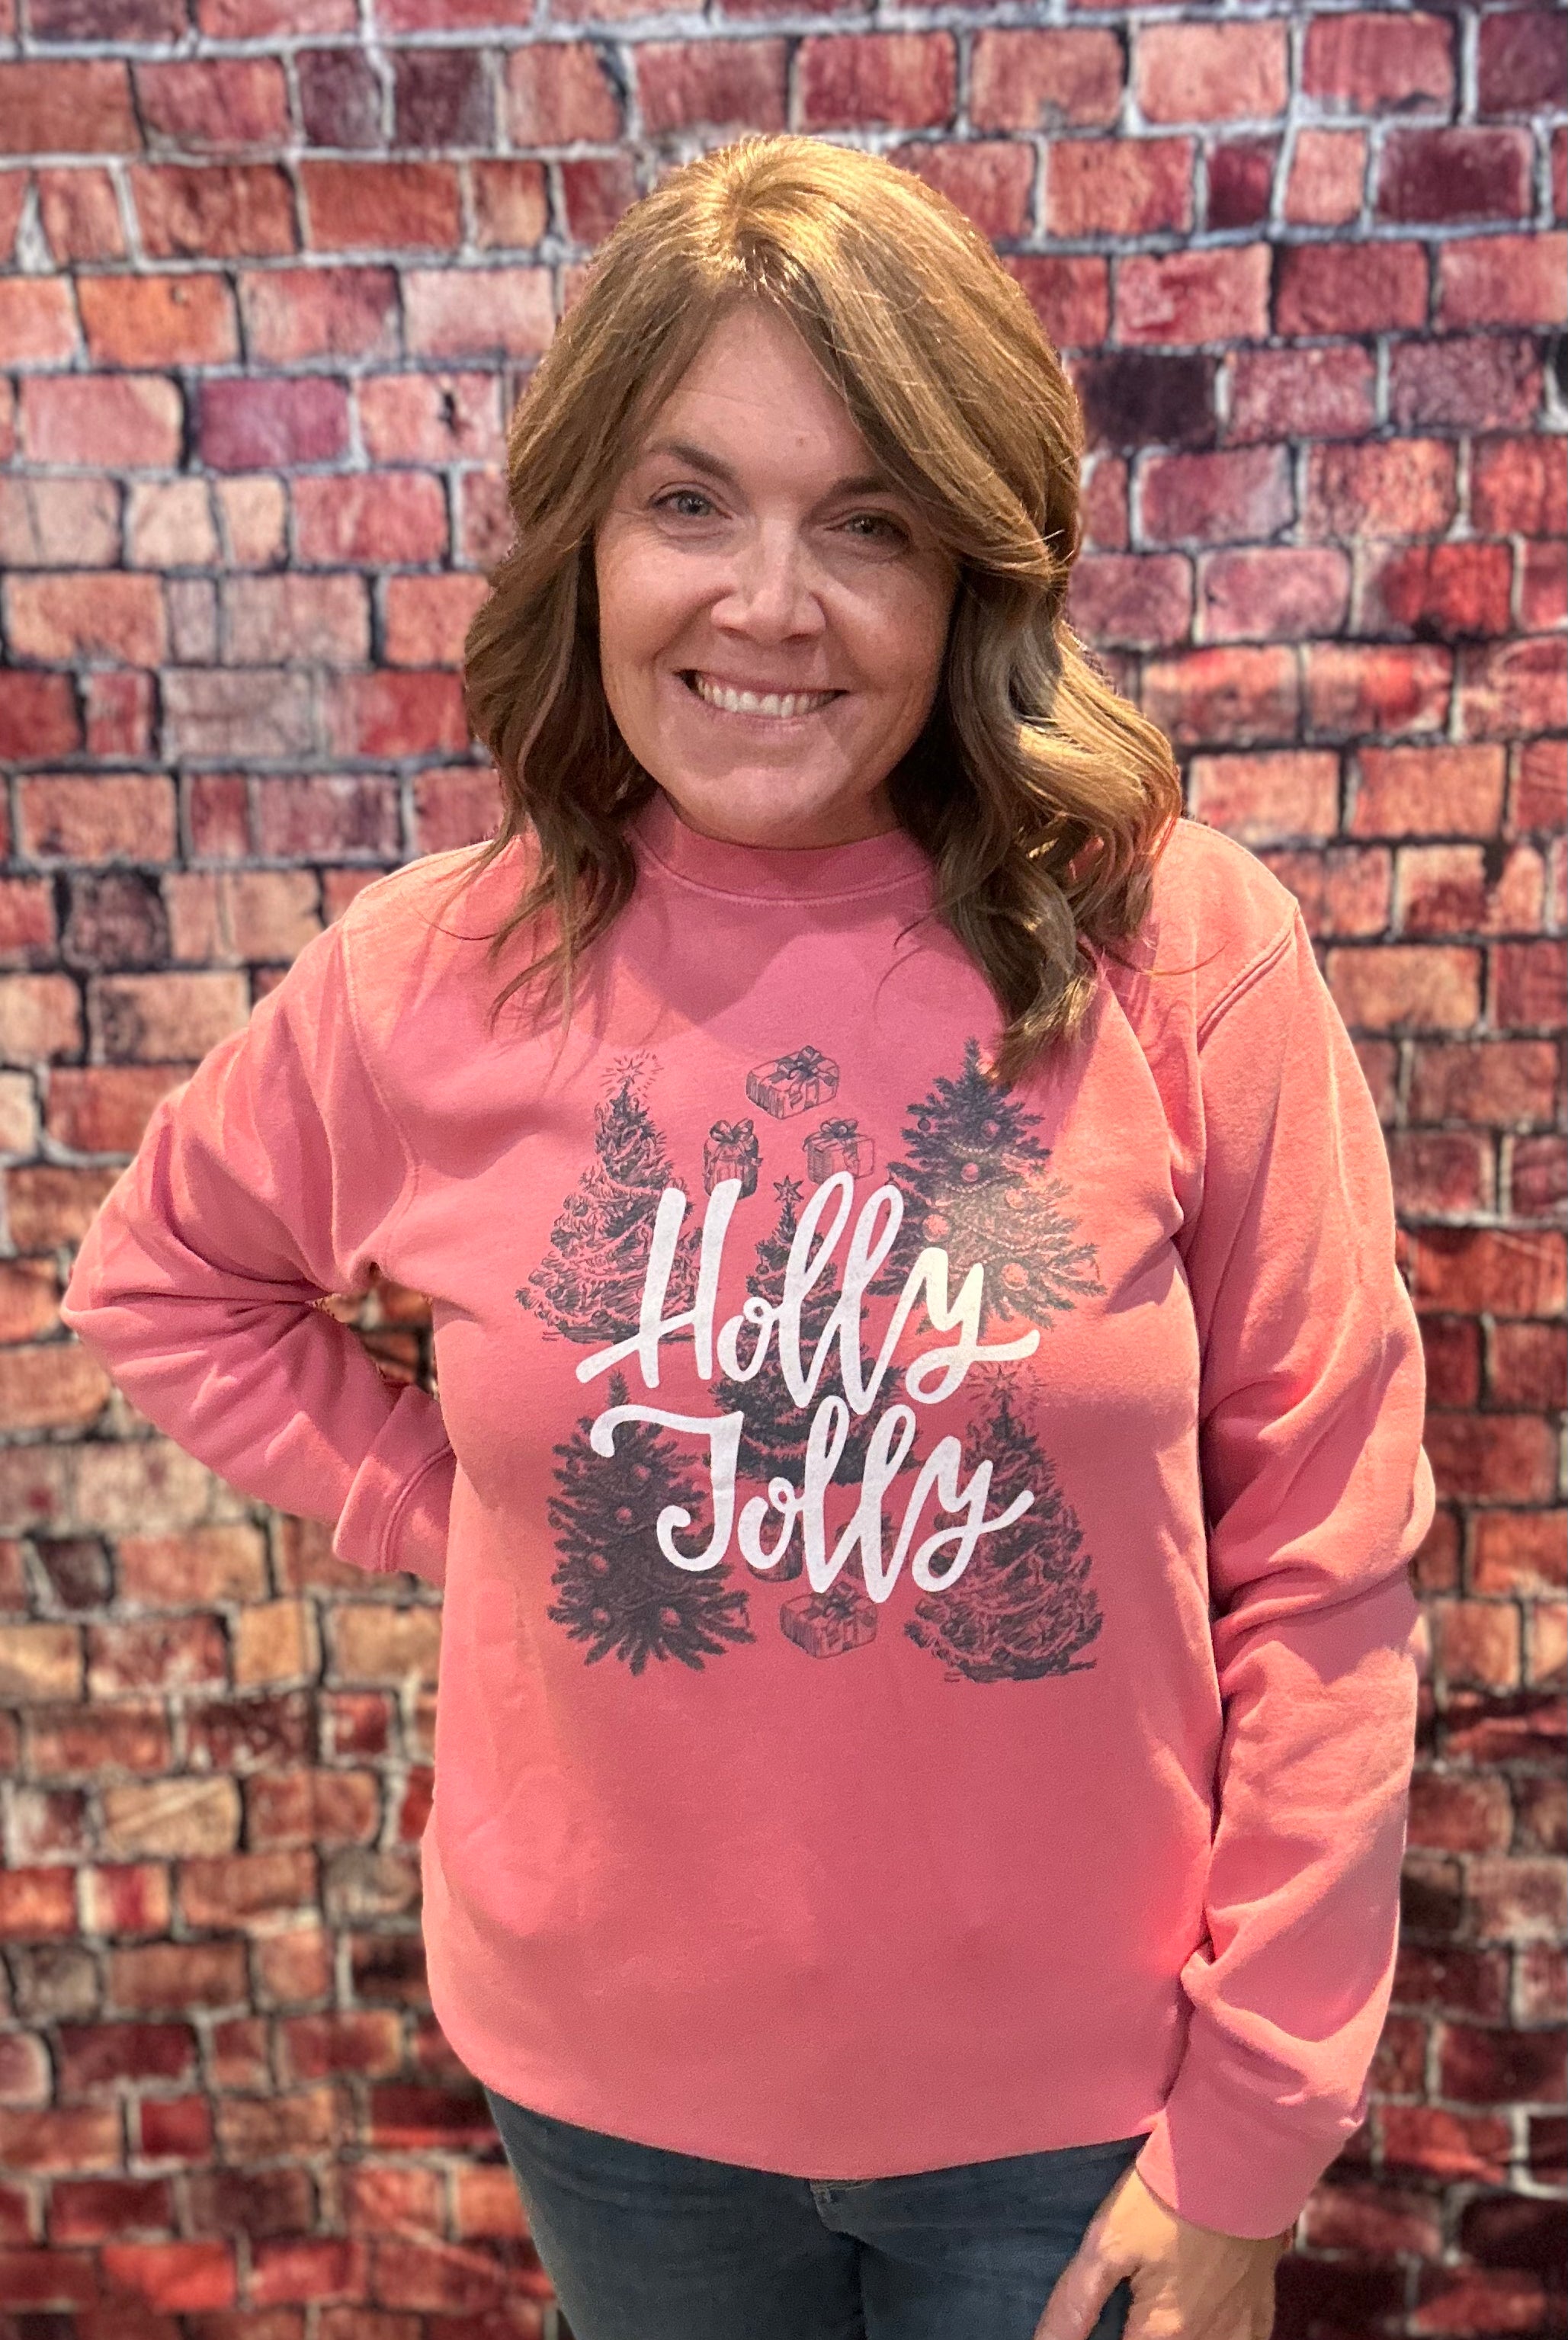 Holly Jolly Sweatshirt-Graphic Sweaters-The Funky Zebra Ames-The Funky Zebra Ames, Women's Fashion Boutique in Ames, Iowa